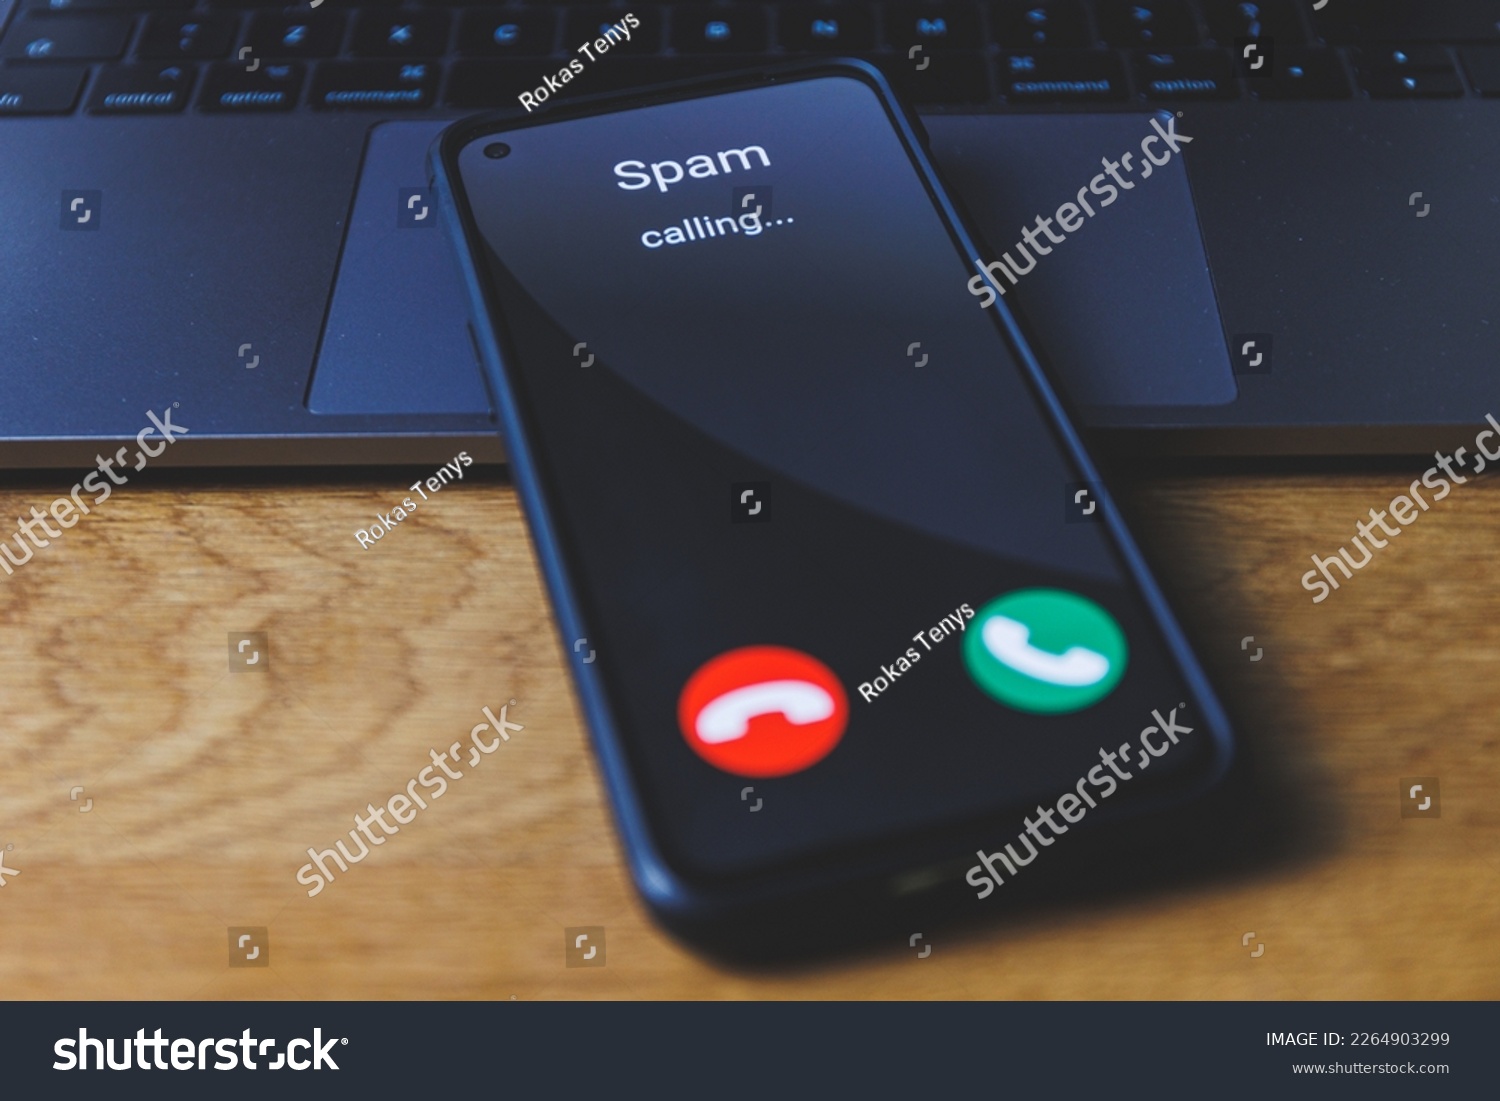 Spam call on phone. Spammer incoming call concept. High quality photo #2264903299